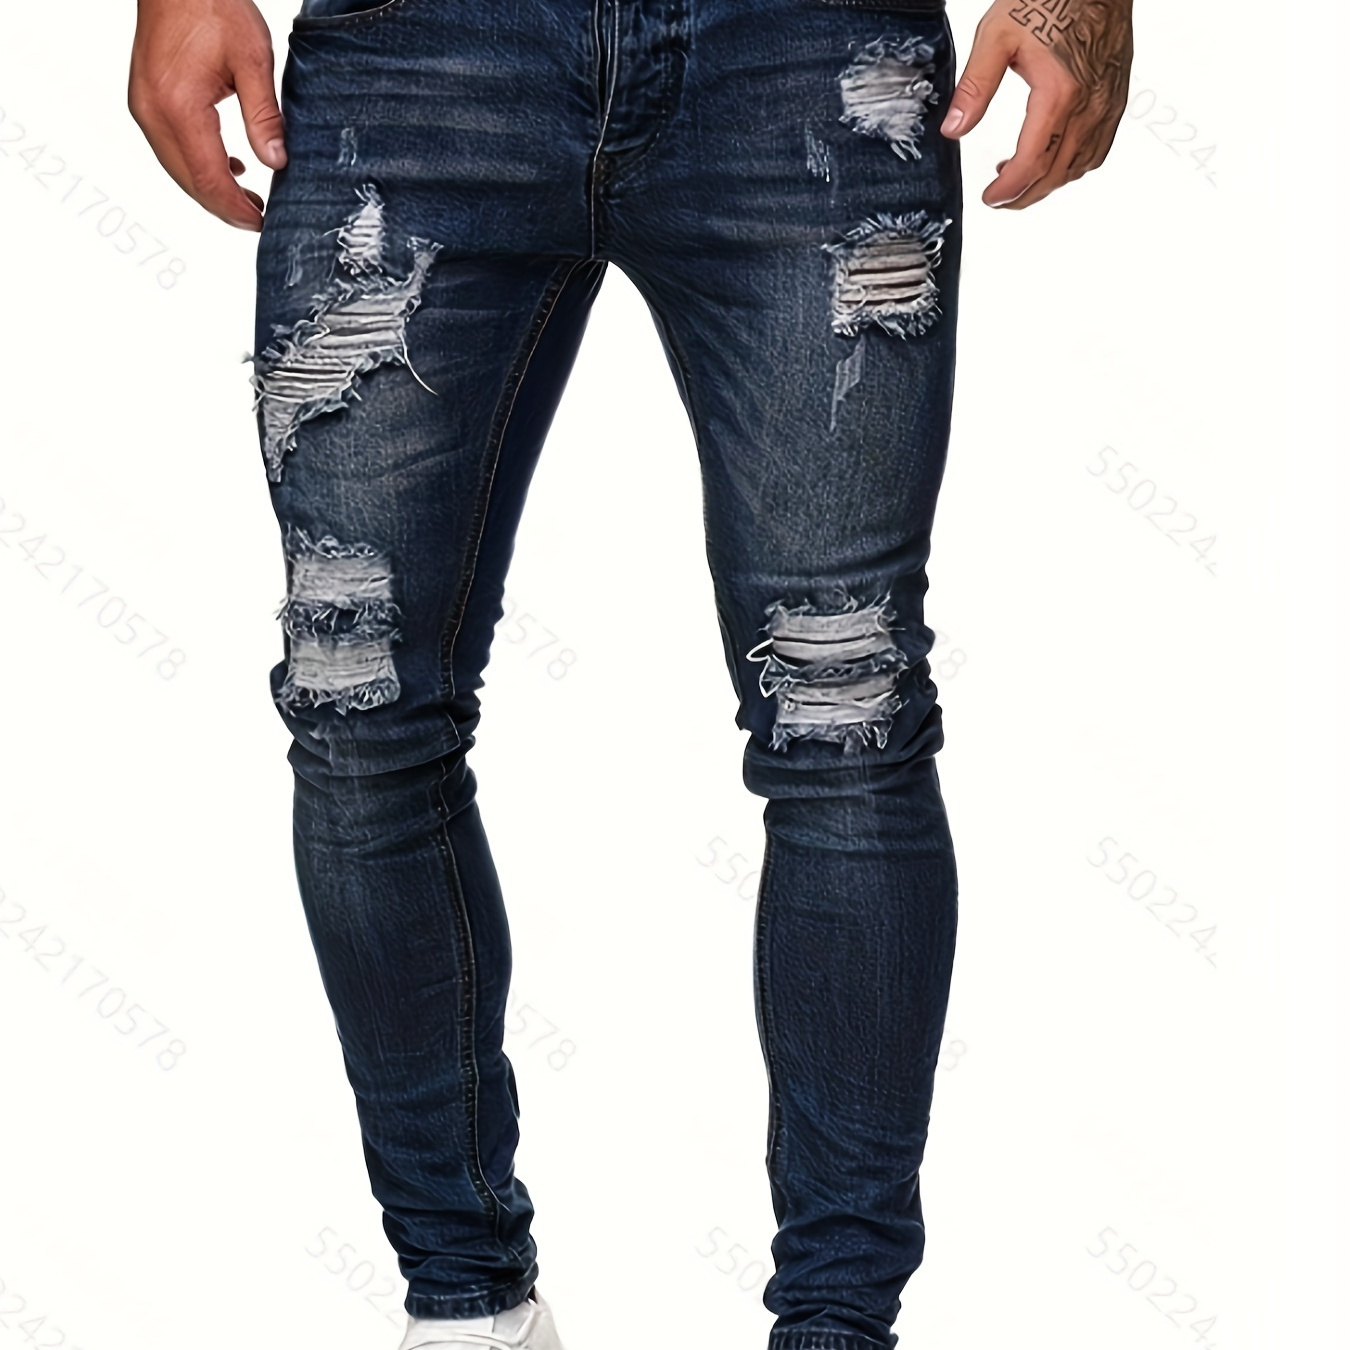 

Slim Fit Ripped Jeans, Men's Casual Street Style Distressed Mid Stretch Denim Pants For Spring Summer